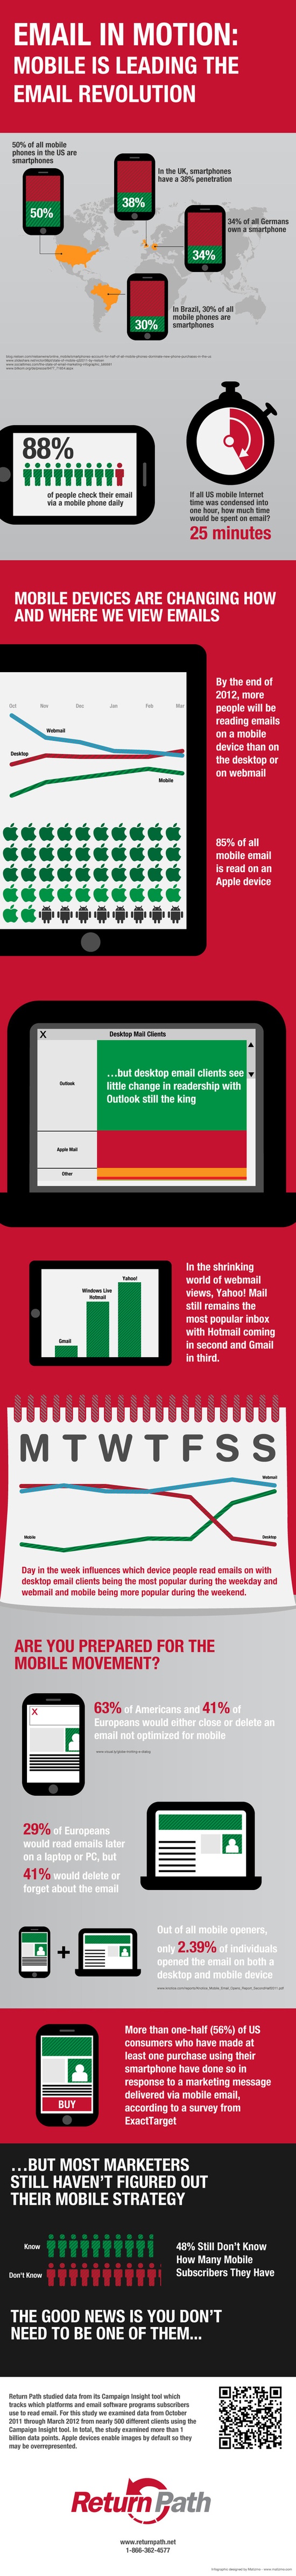 How-Mobile-is-Leading-the-Email-Revolution-INFOGRAPHIC